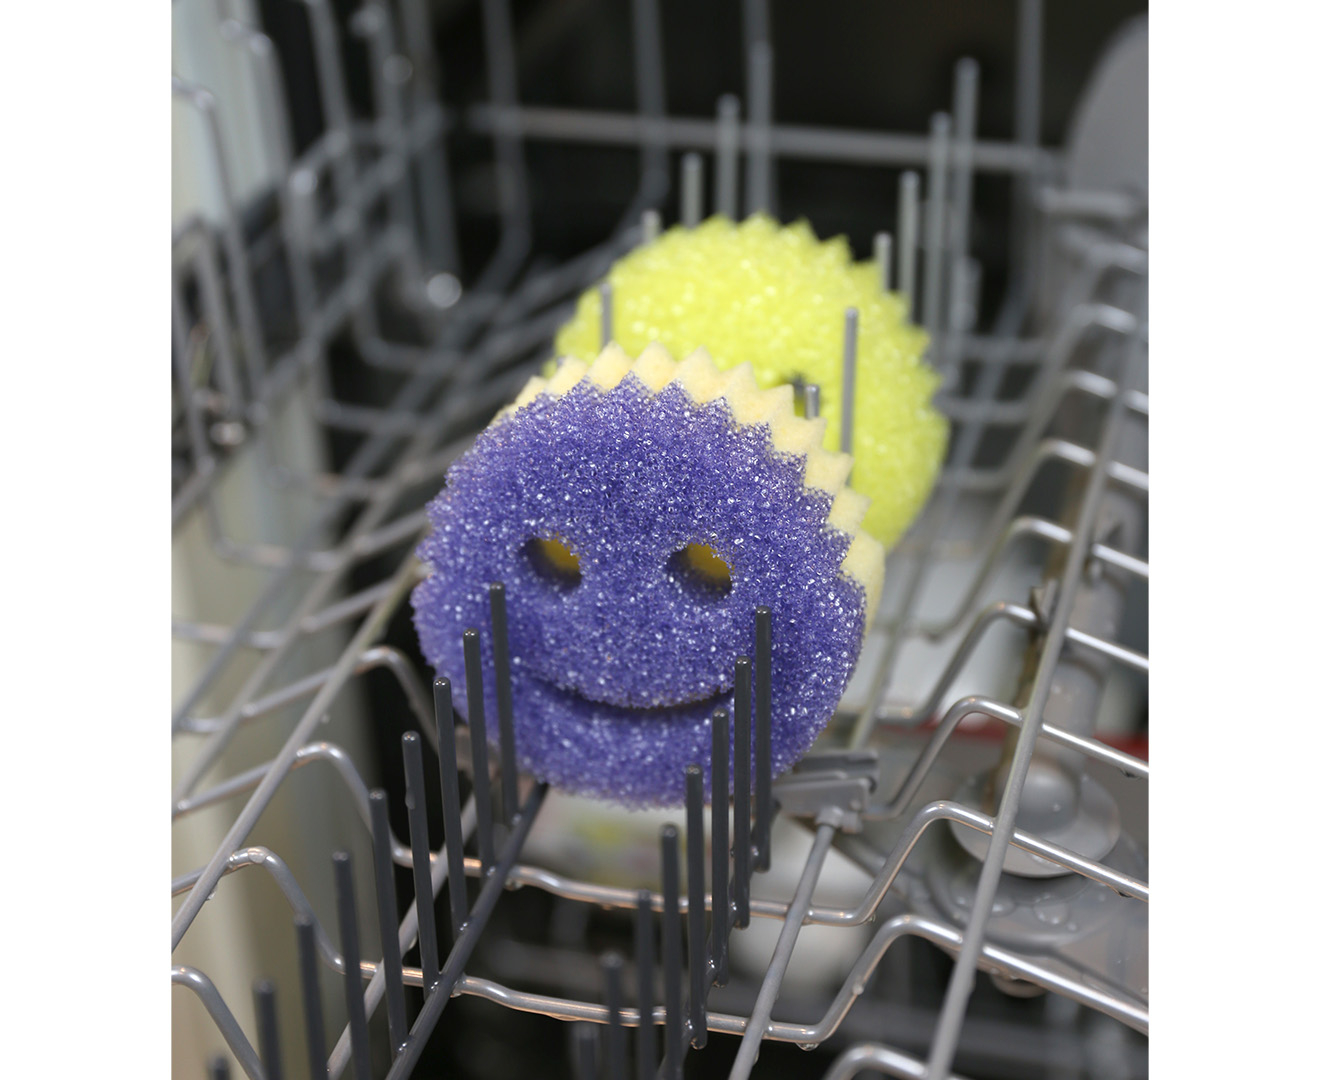 Scrub Daddy Dual-Sided Sponge and Scrubber- Scrub Mommy Dye Free -  Scratch-Free Scrubber for Dishes and Home, Odor Resistant, Soft in Warm  Water, Firm in Cold, Deep Cleaning, Dishwasher Safe, 1ct 1